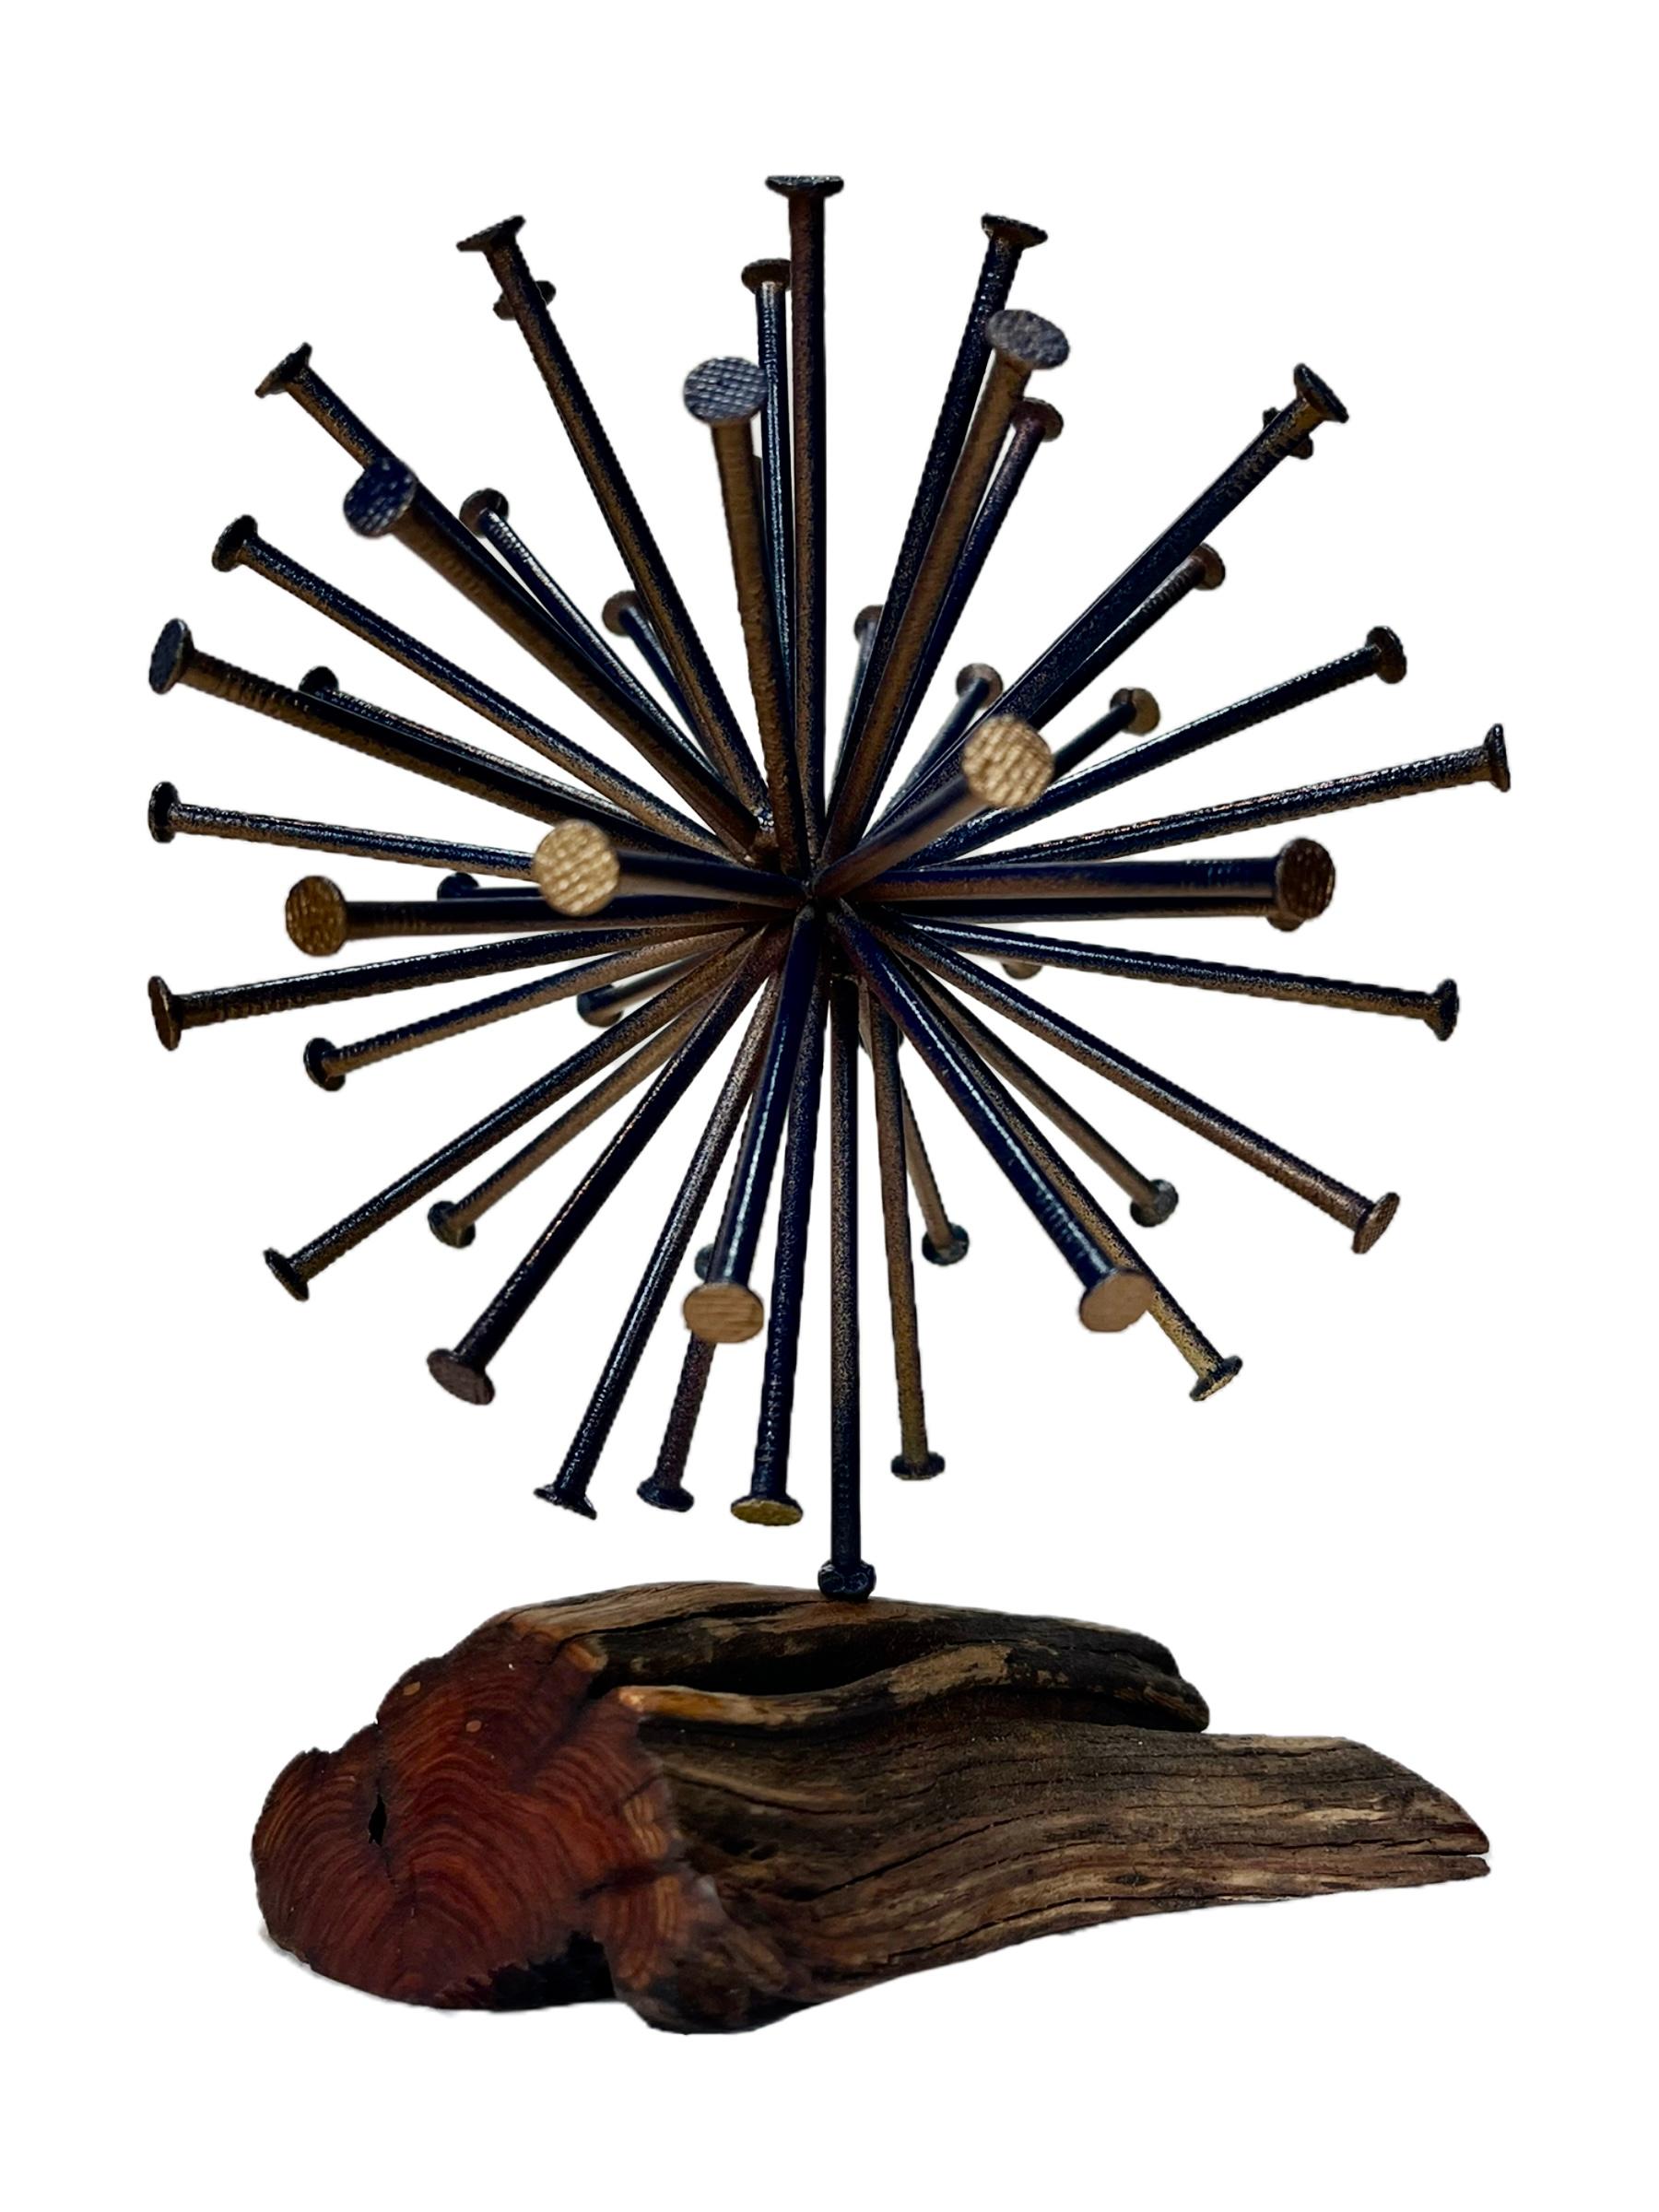 Beautiful sphere sculpture created from wood and nails. Signed. Unknown artist.

Measures: 8.5”H x 6”W x 6”D.